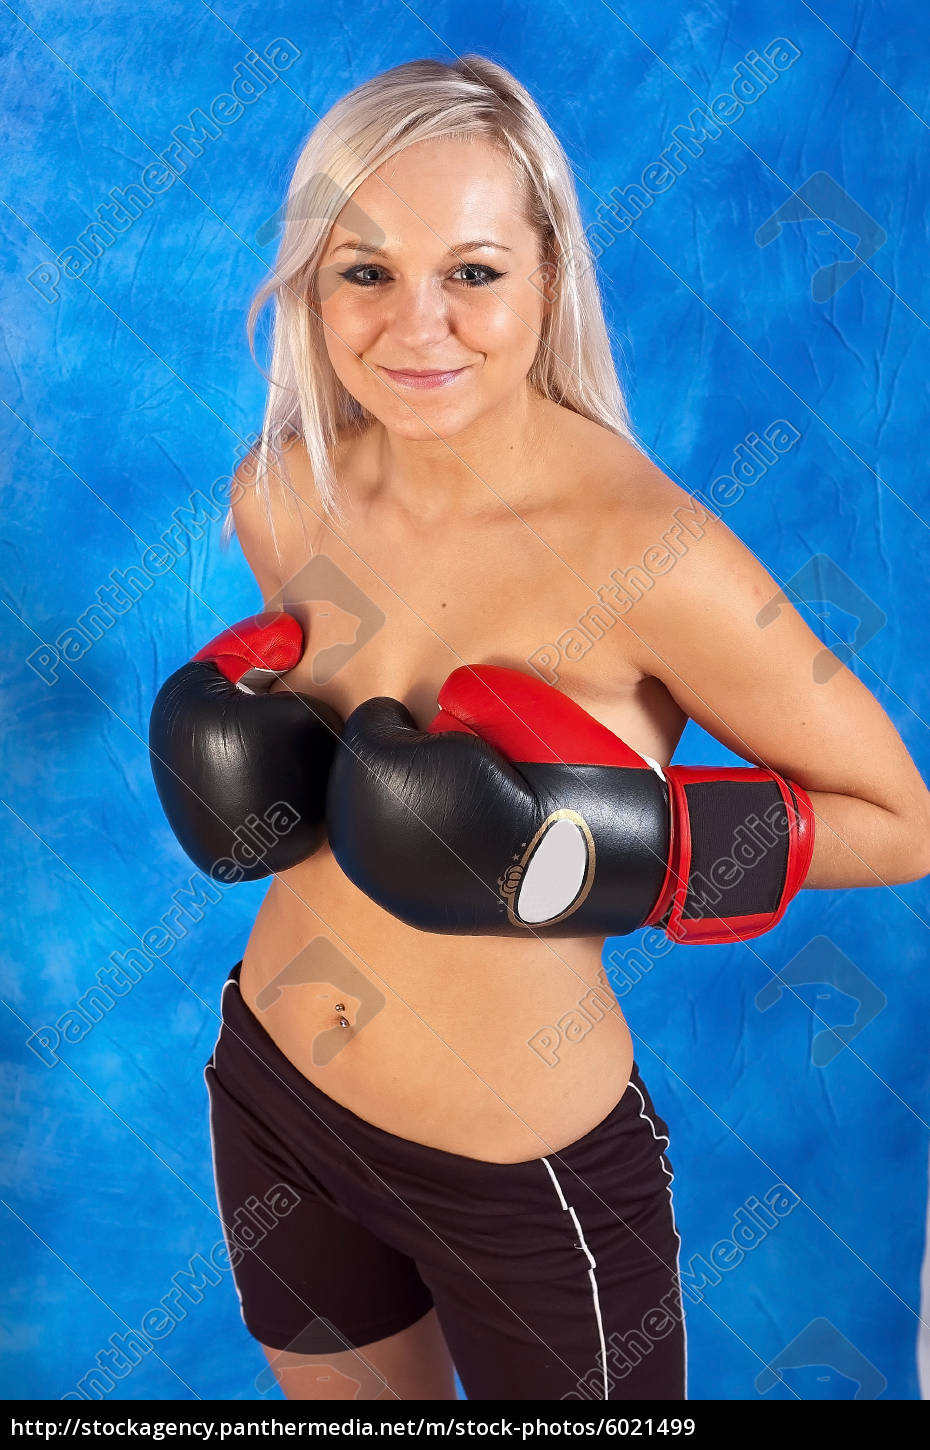 young sexy girls in boxing gloves - Stock Photo #6021499